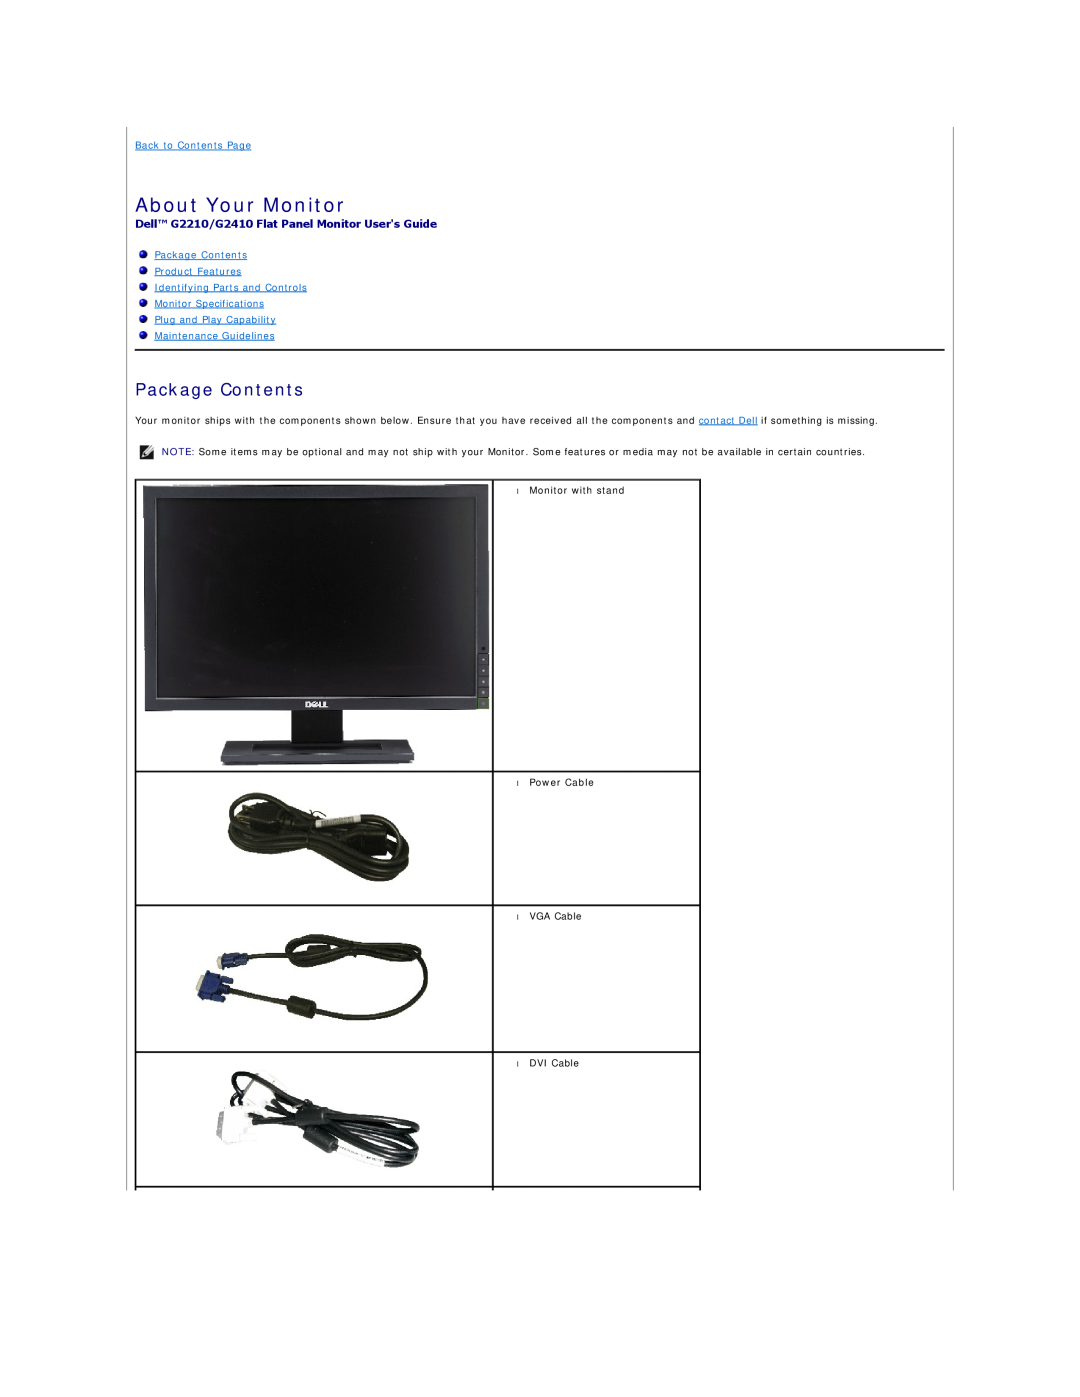 Dell About Your Monitor, Package Contents, Dell G2210/G2410 Flat Panel Monitor Users Guide, Back to Contents Page 